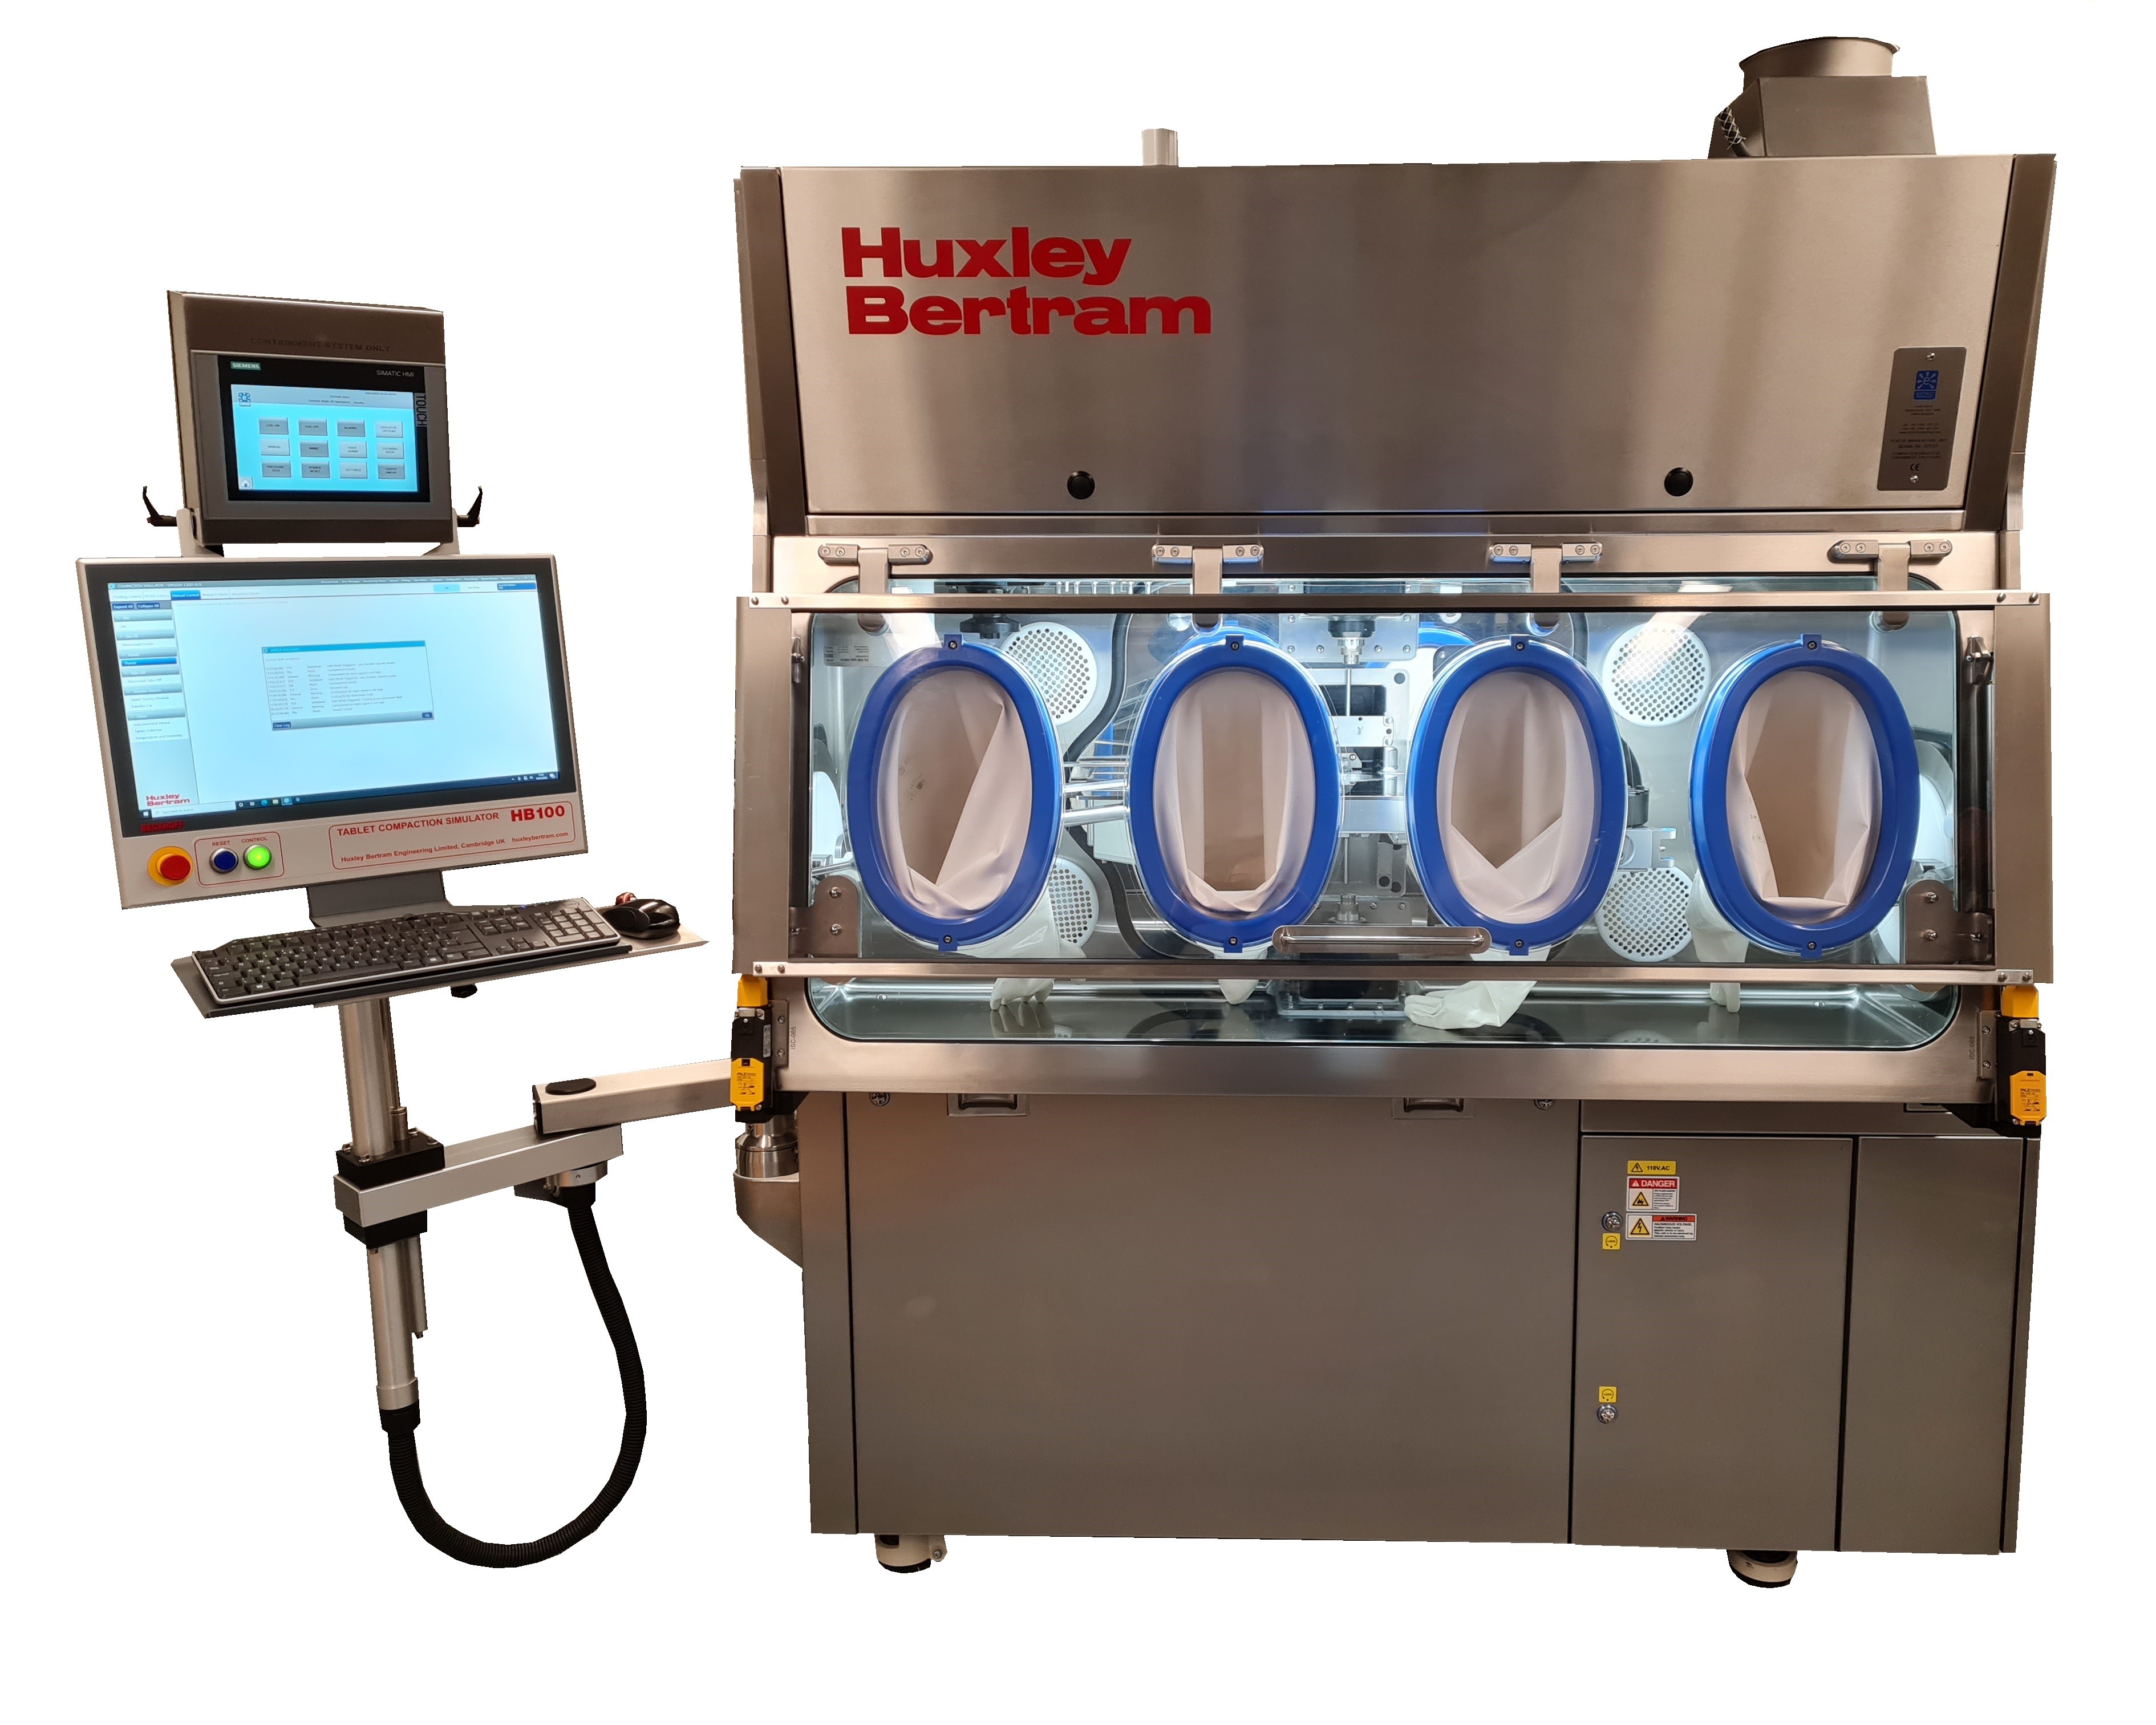 Compaction Simulation Machine Under Containment for research into the use of Active Pharmaceutical Ingredients and Hazardous Active Pharmaceutical Ingredients